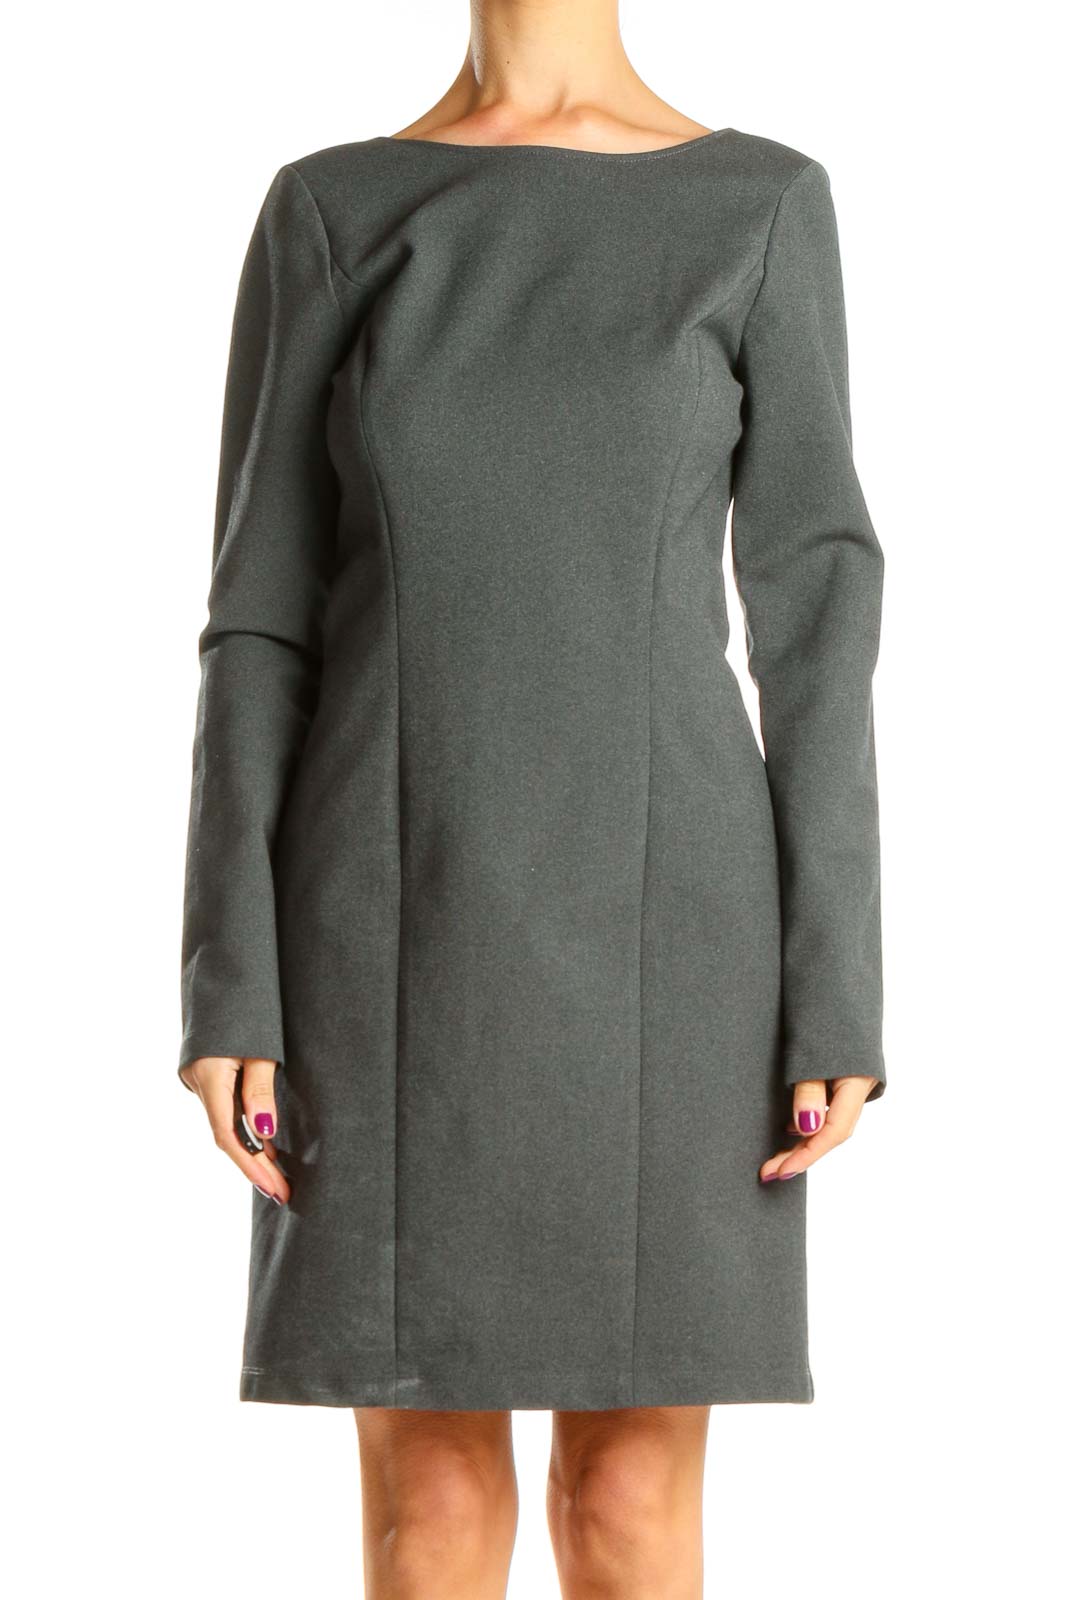 Gray Structured Work A-Line Dress Front